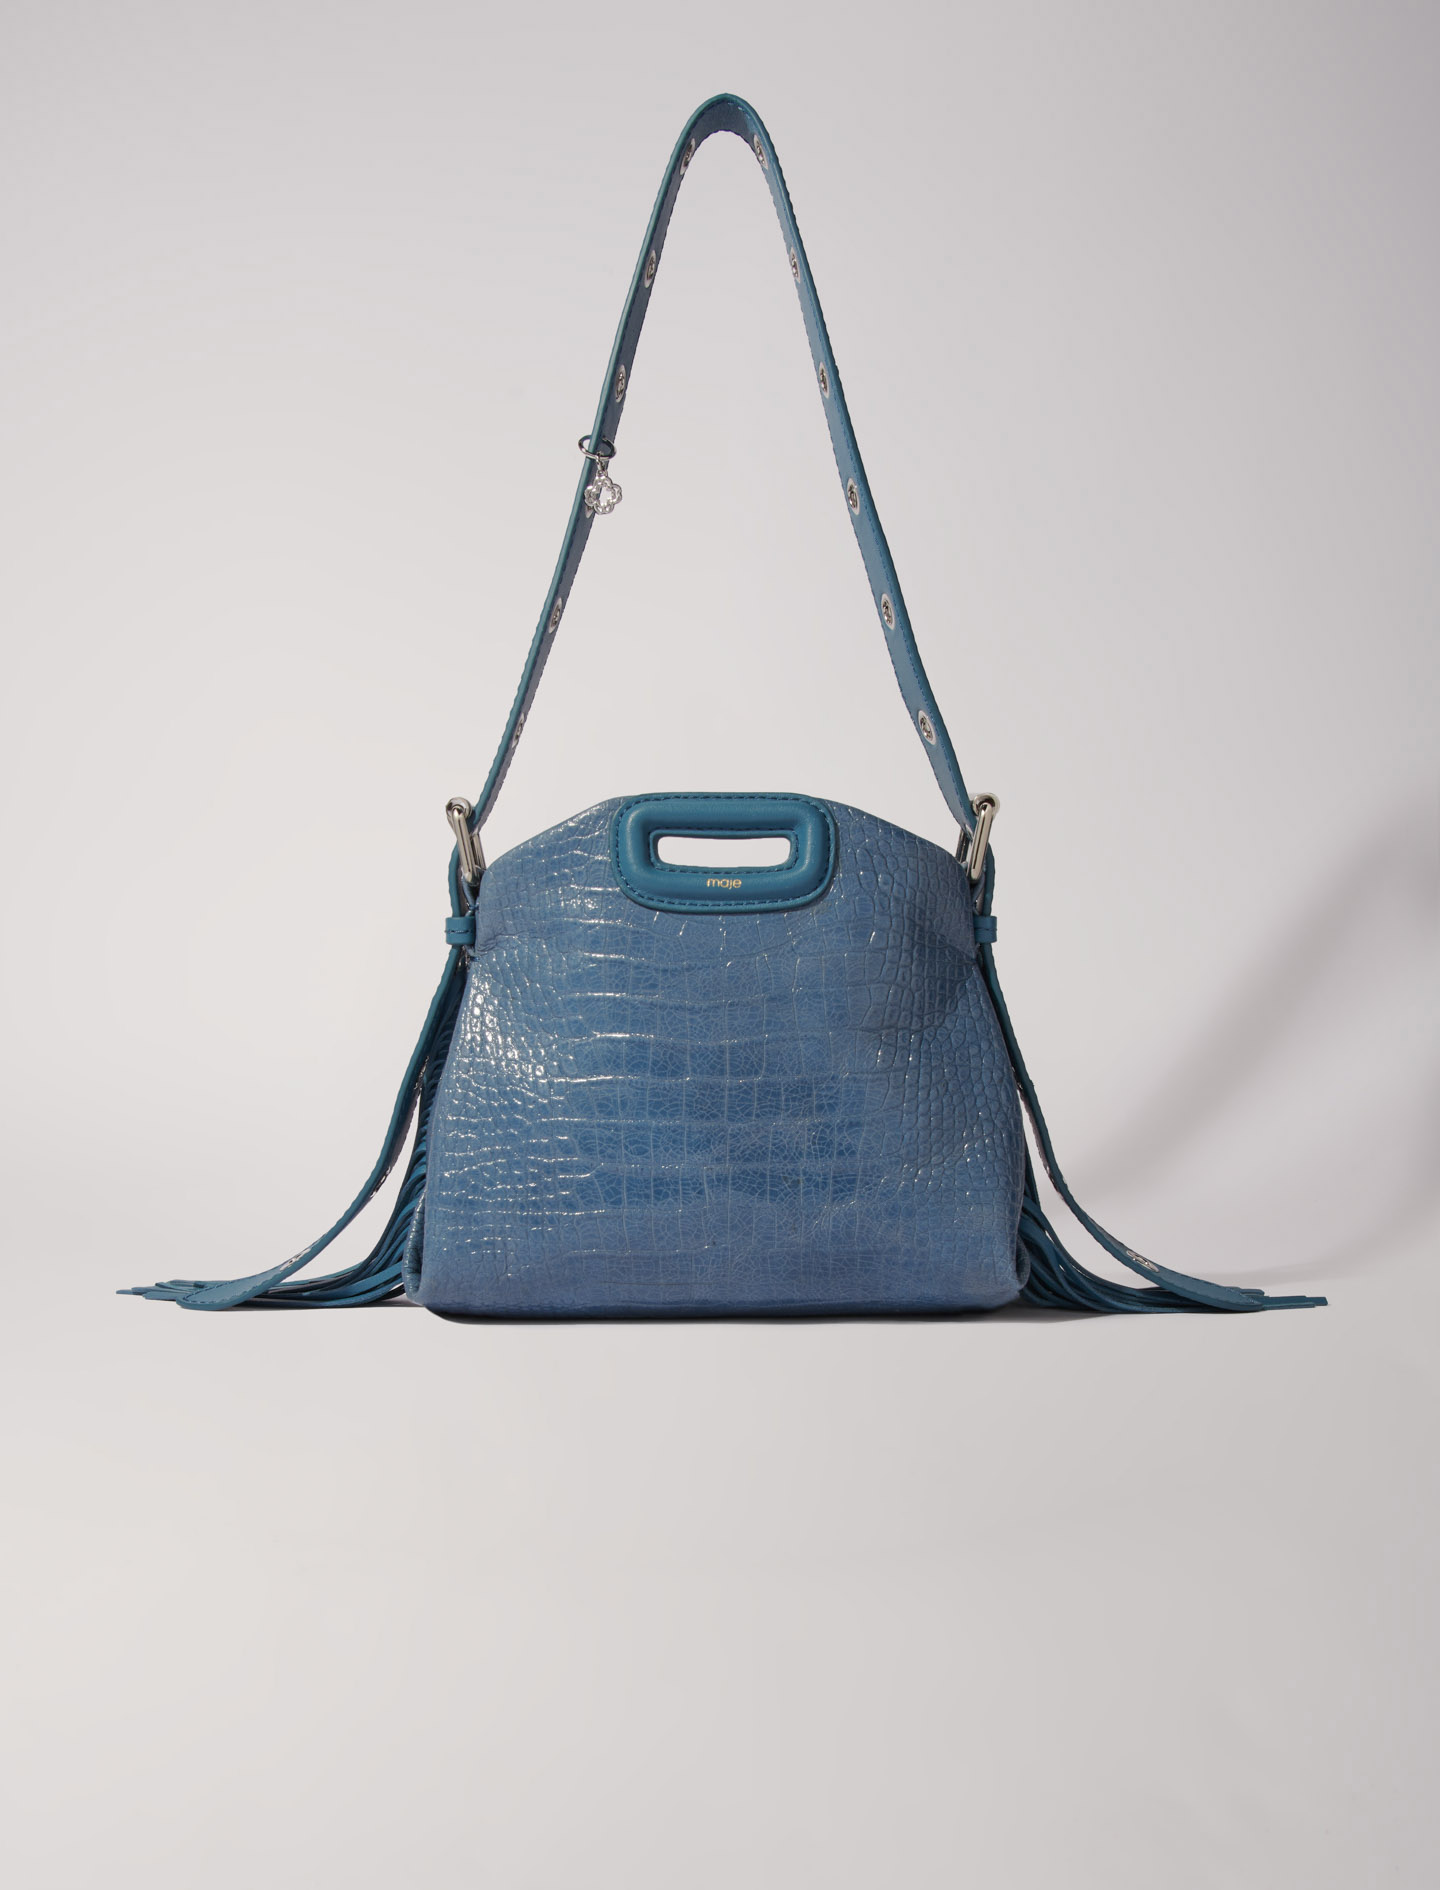 Woman's polyester Leather: Mock croc Miss M mini bag for Fall/Winter, size Woman-All Bags-OS (ONE SIZE), in color Blue / Grey /